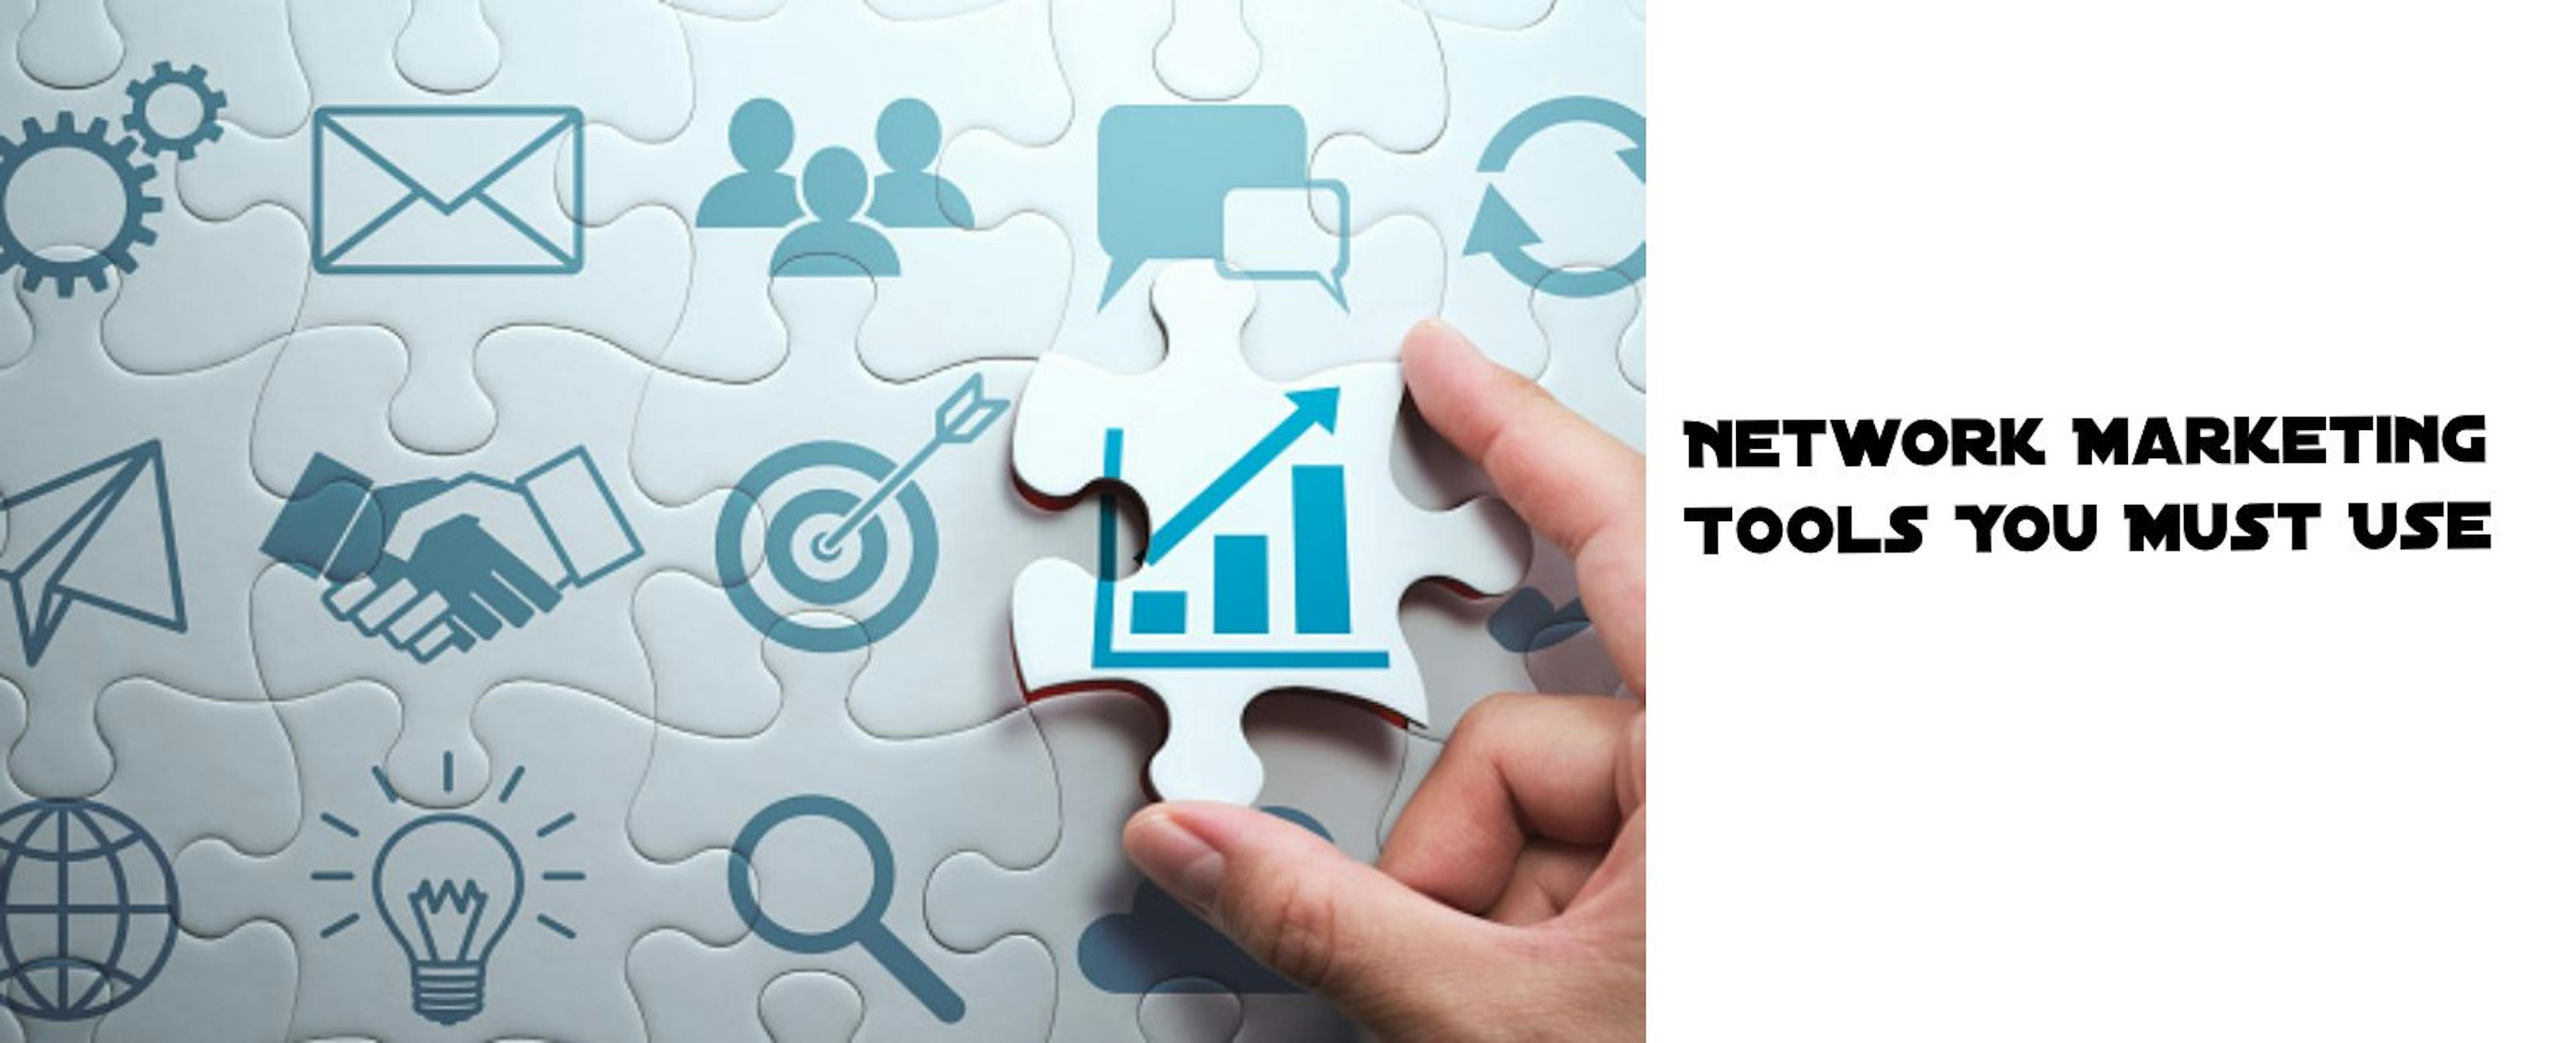 featured image - Network Marketing Tools You Must Use